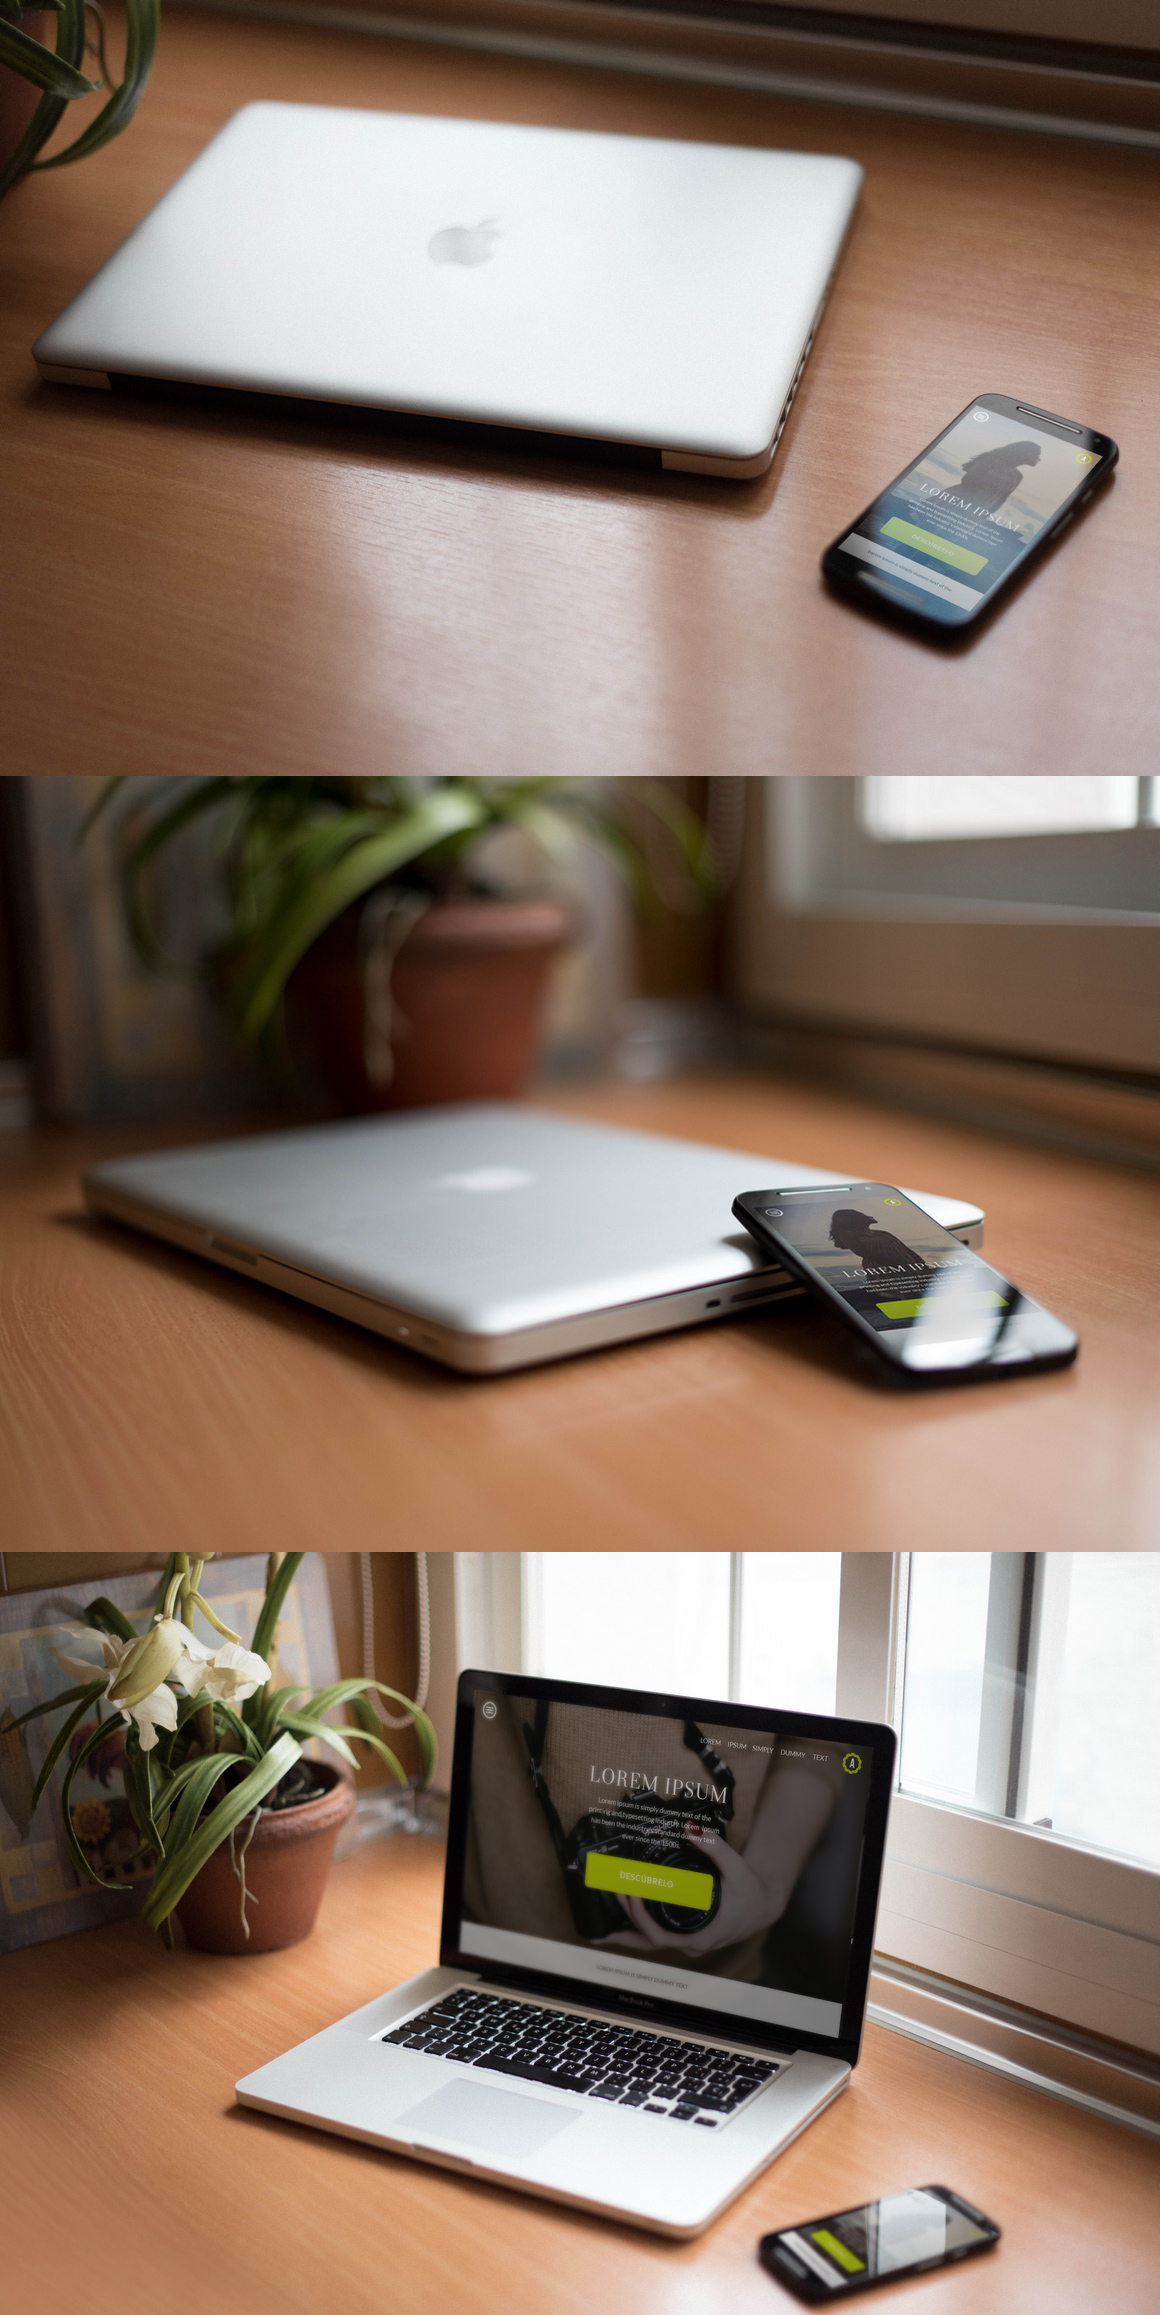 7 Smartphones and Notebook Mockup - Free PSD